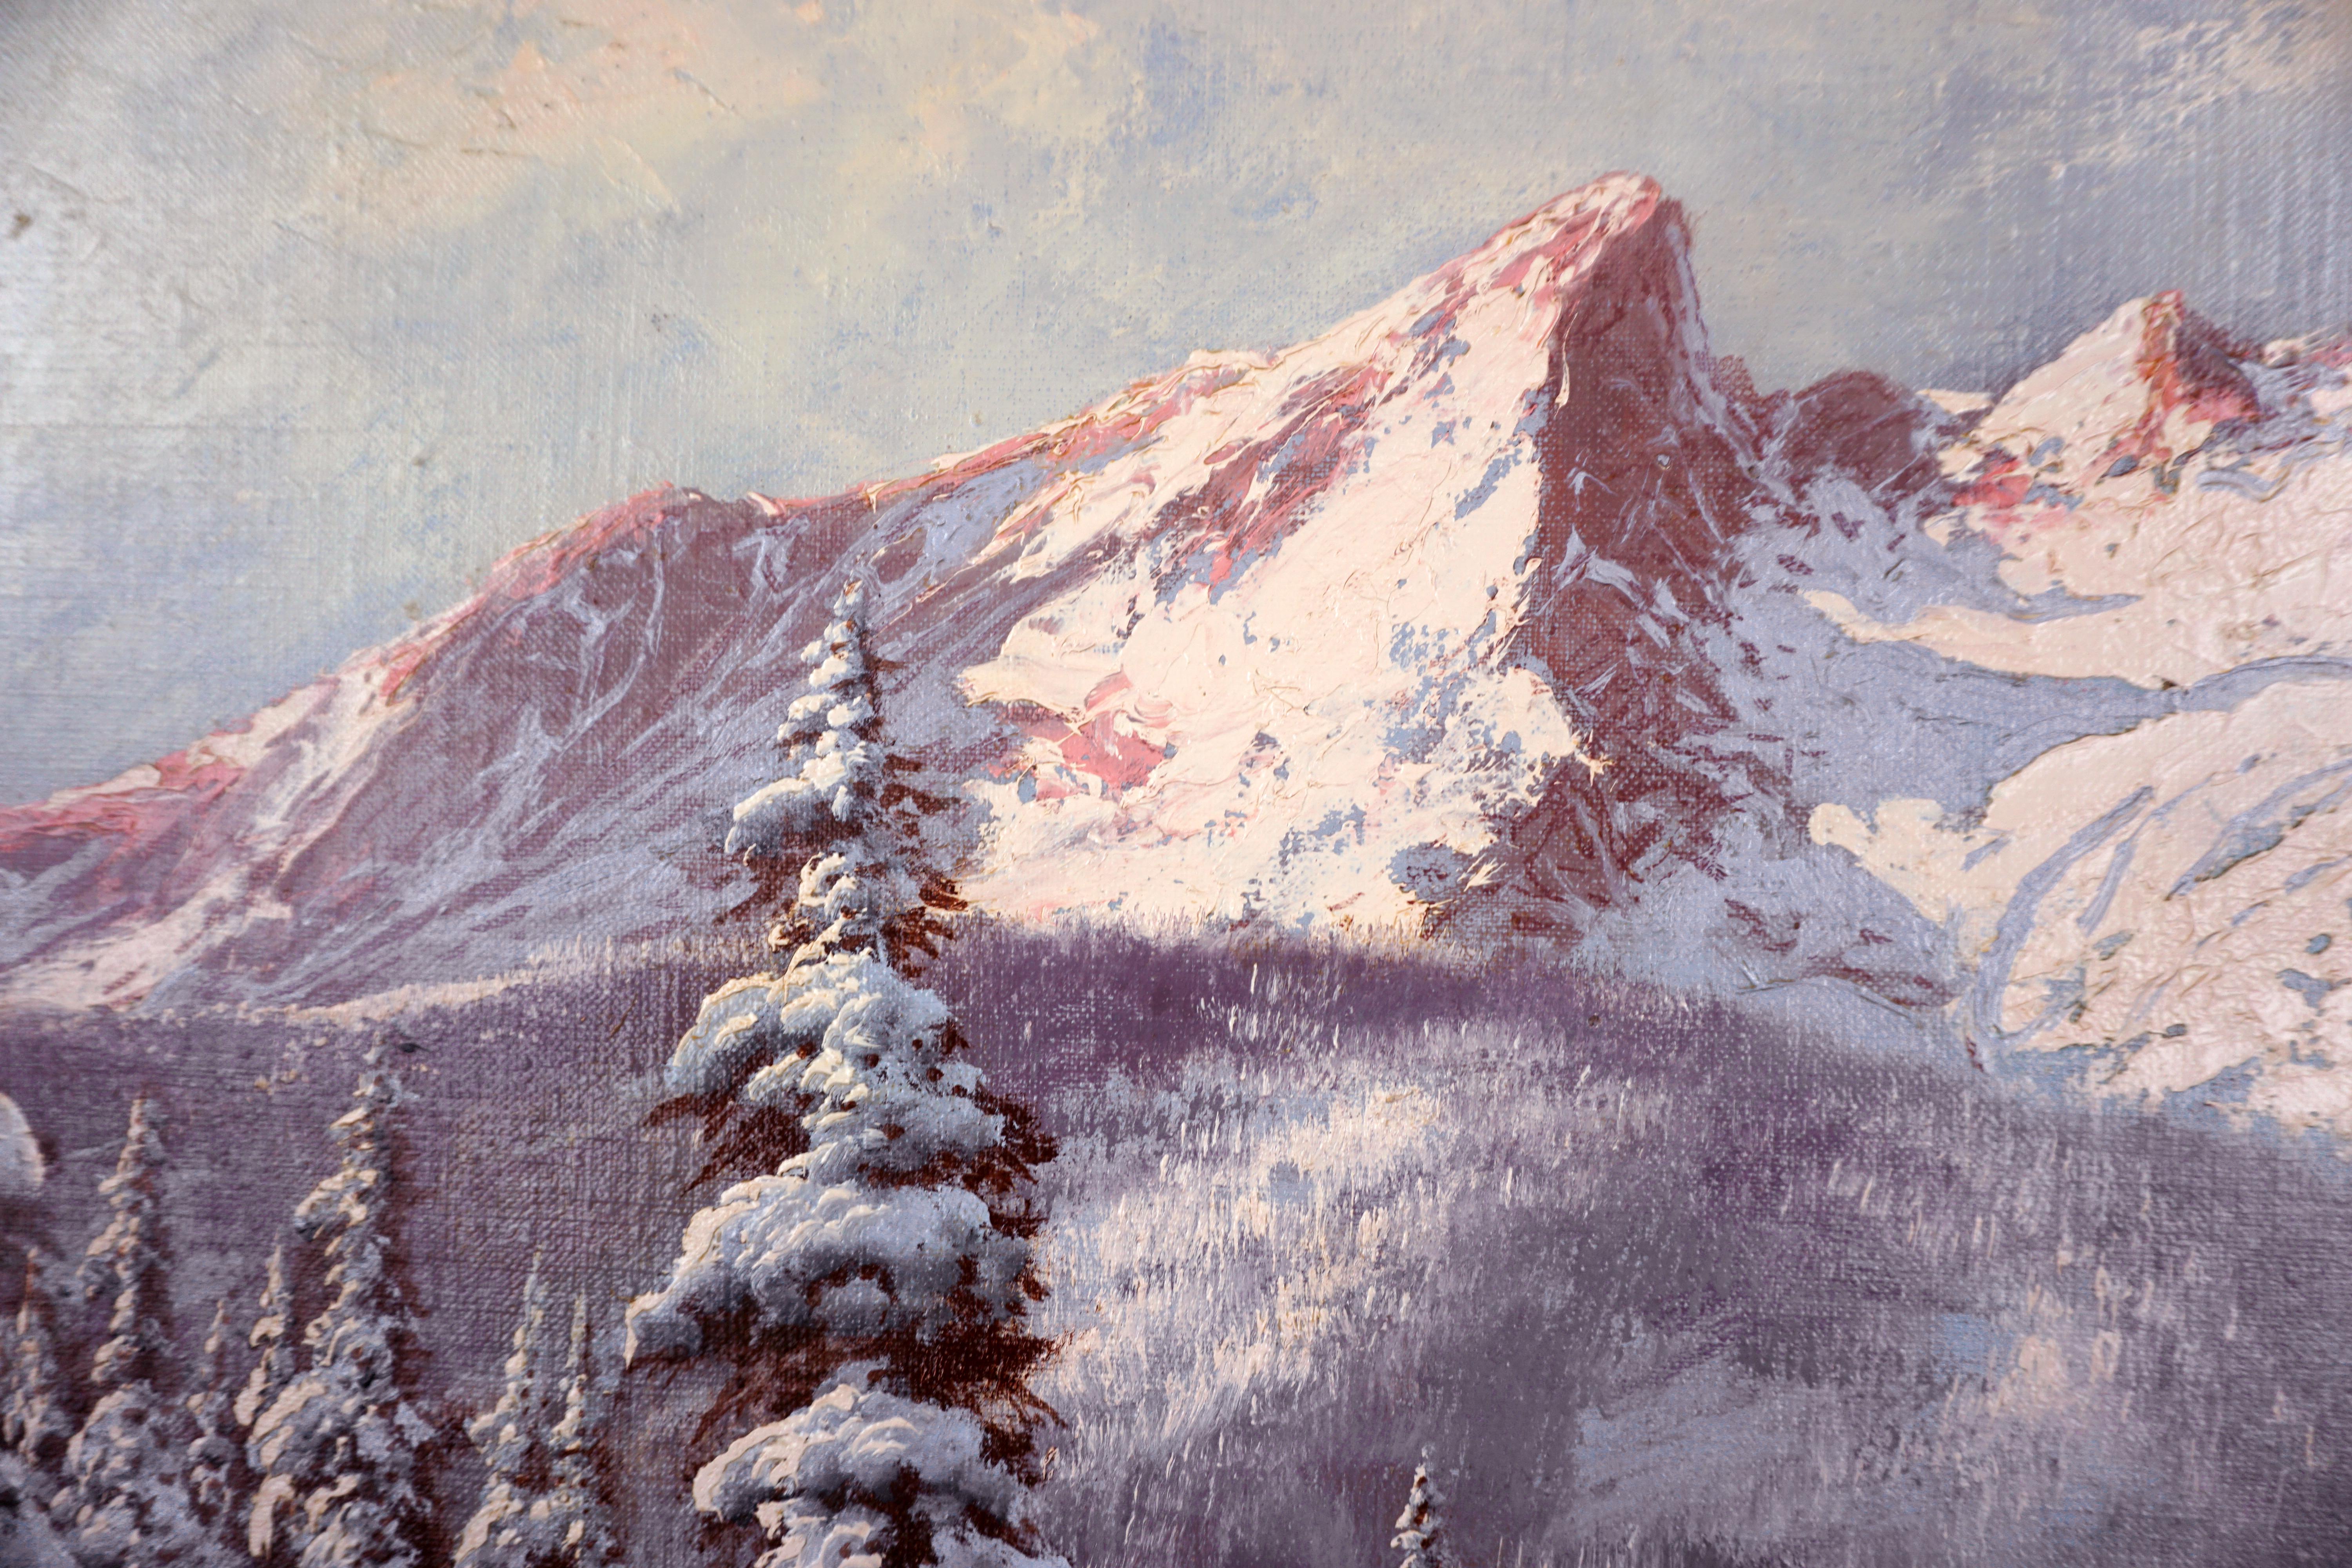 Winter's Snowy Tatra Mountains with Pines and Stream - Post-War Painting by Laszlo Neogrady